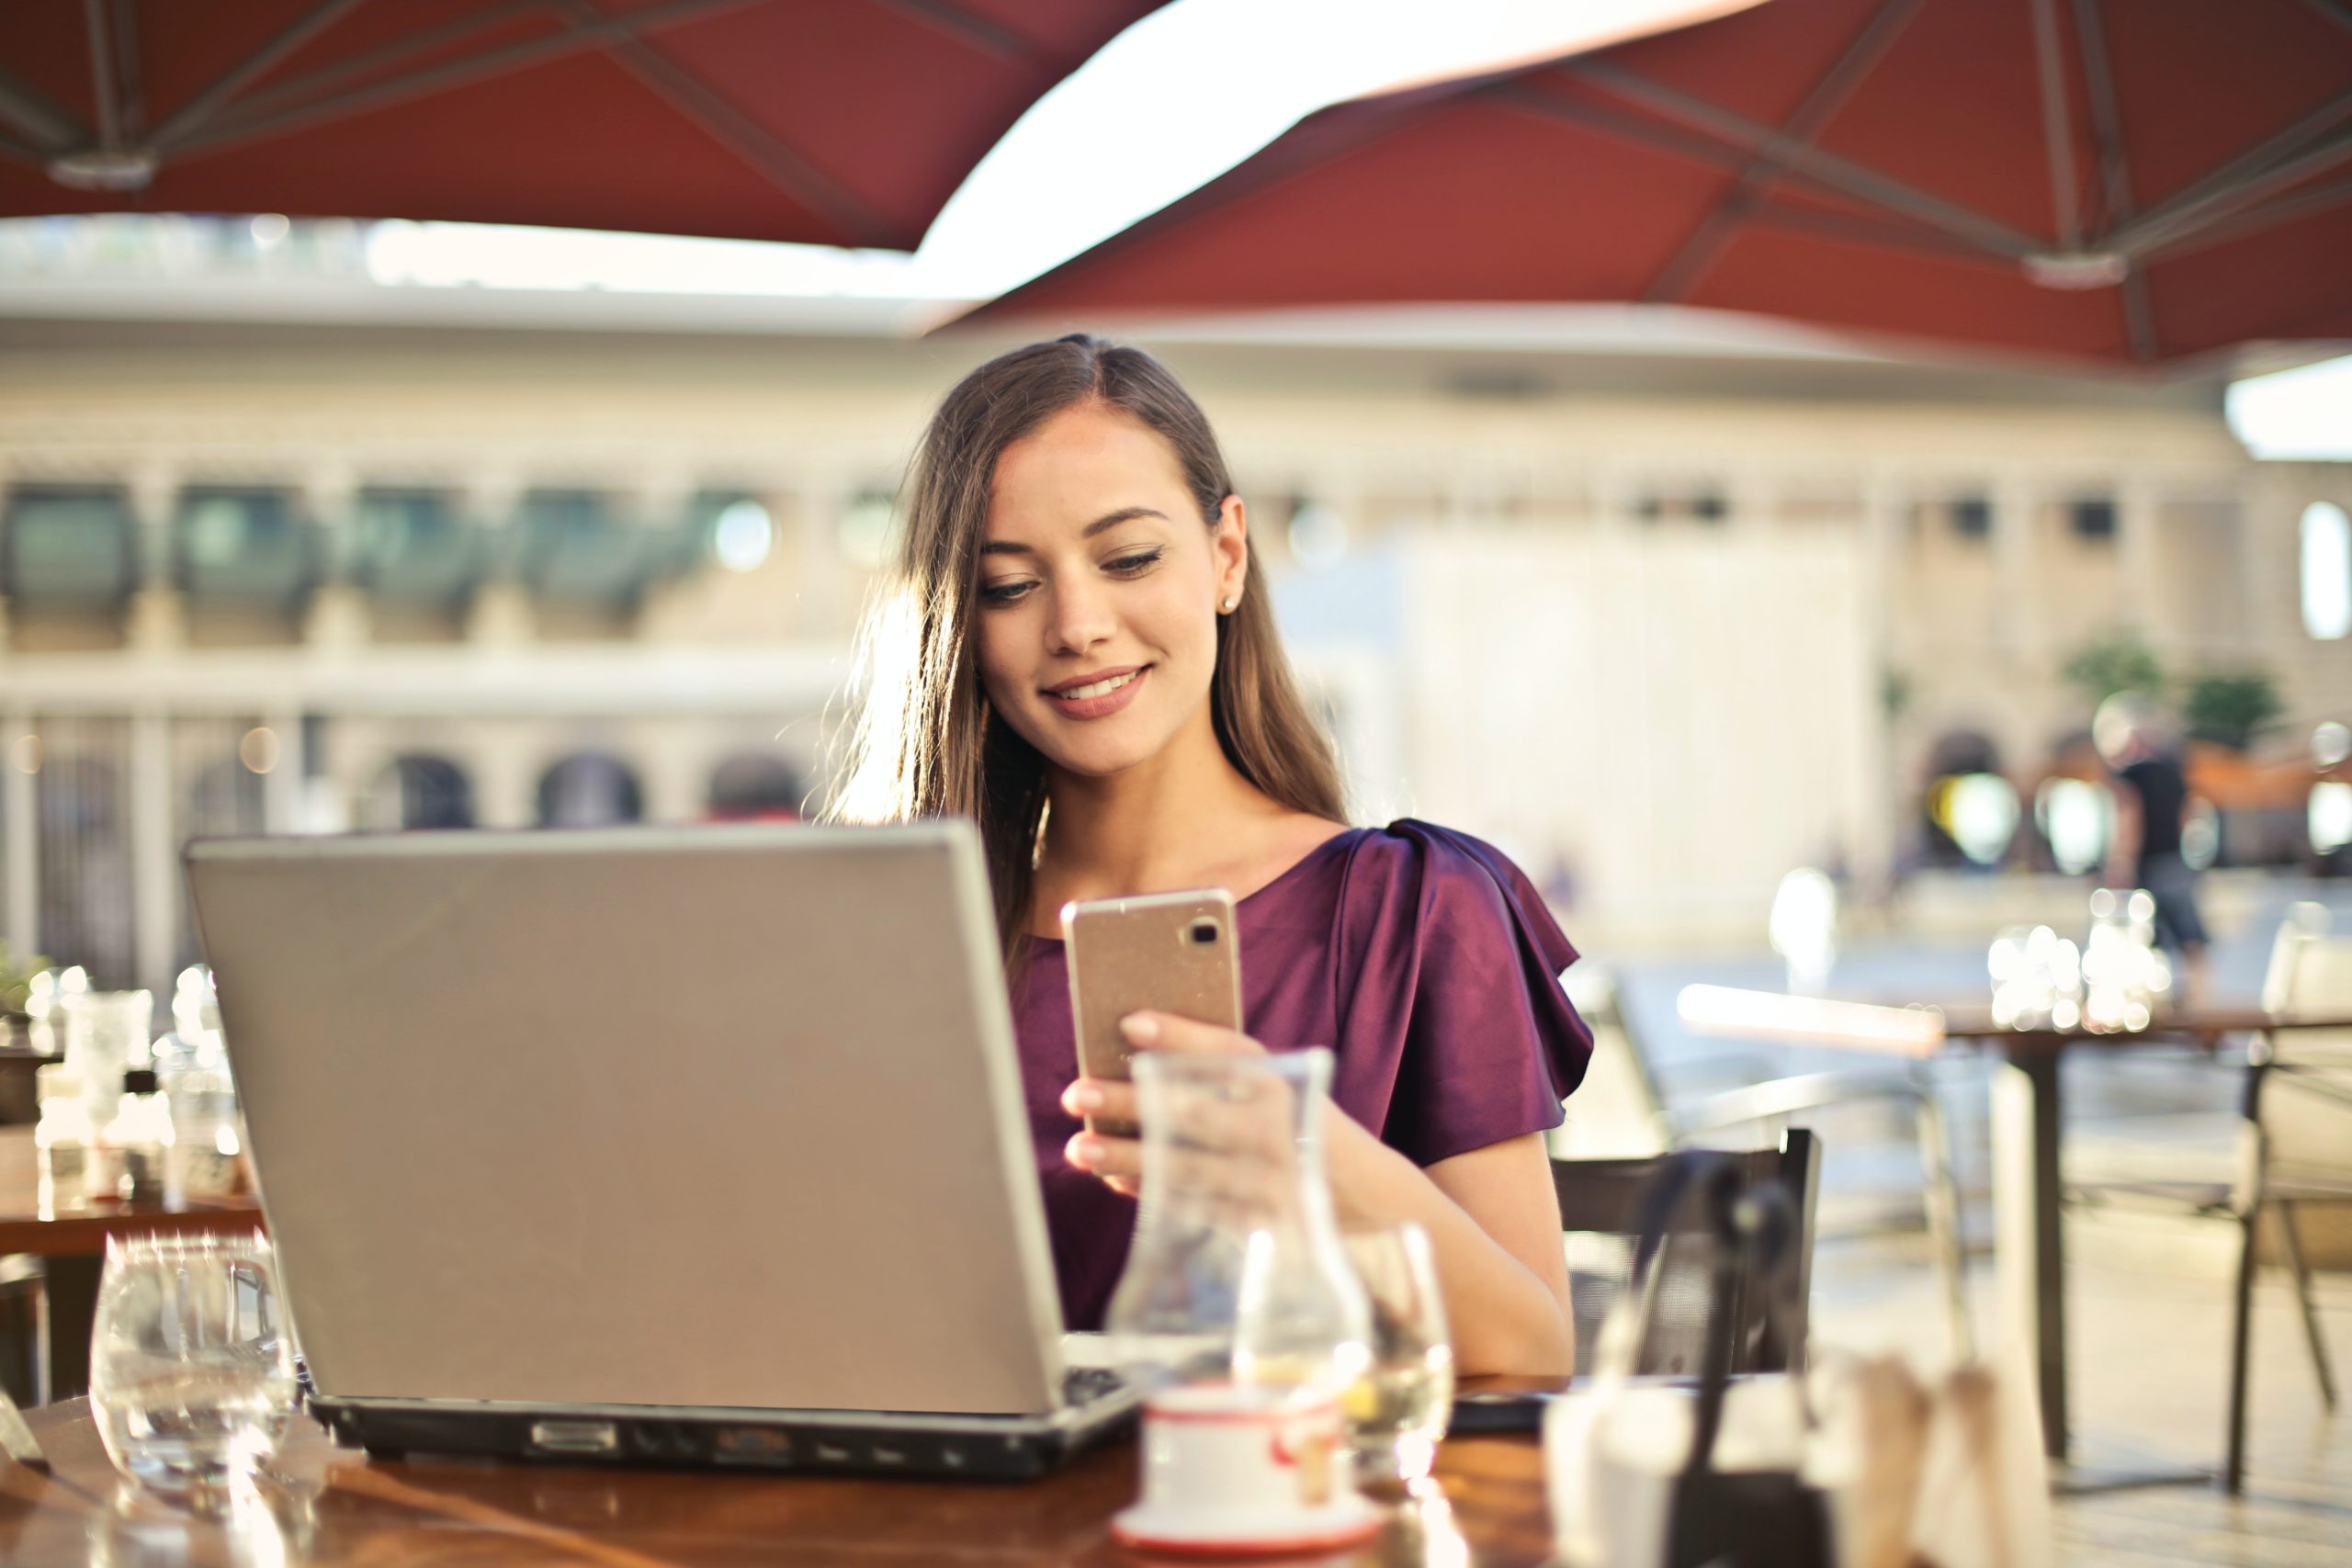 Online business context, woman sitting at table with laptop and cell phone